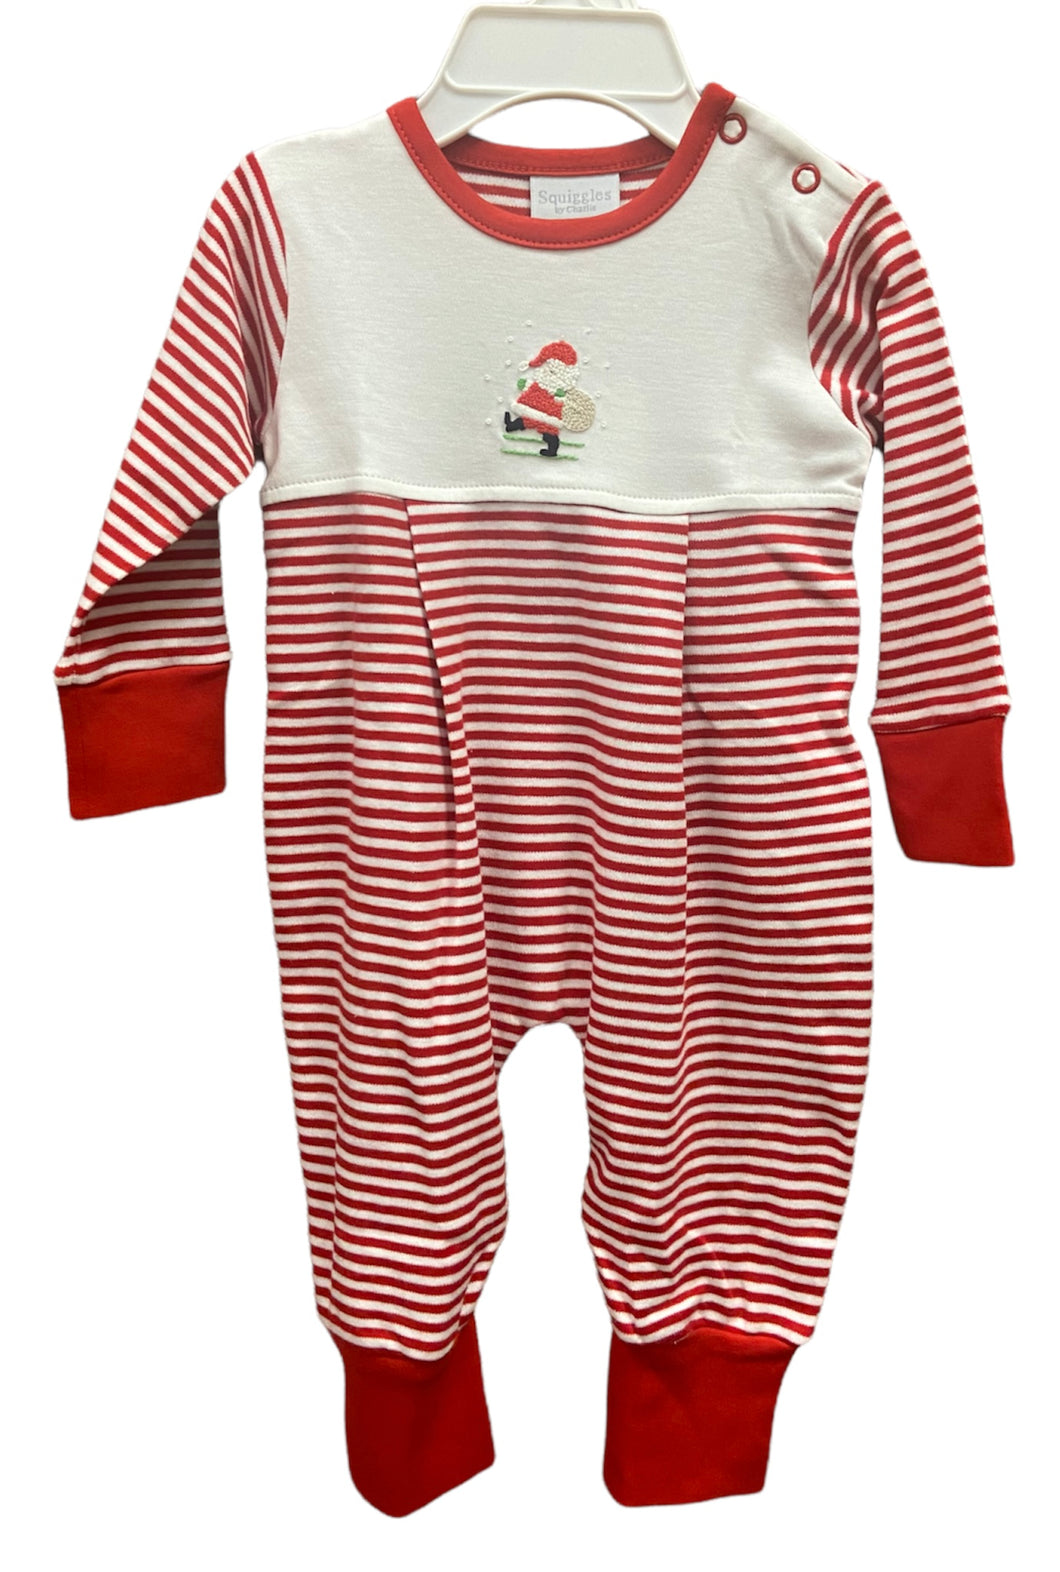 Red Striped Santa Romper by Squiggles